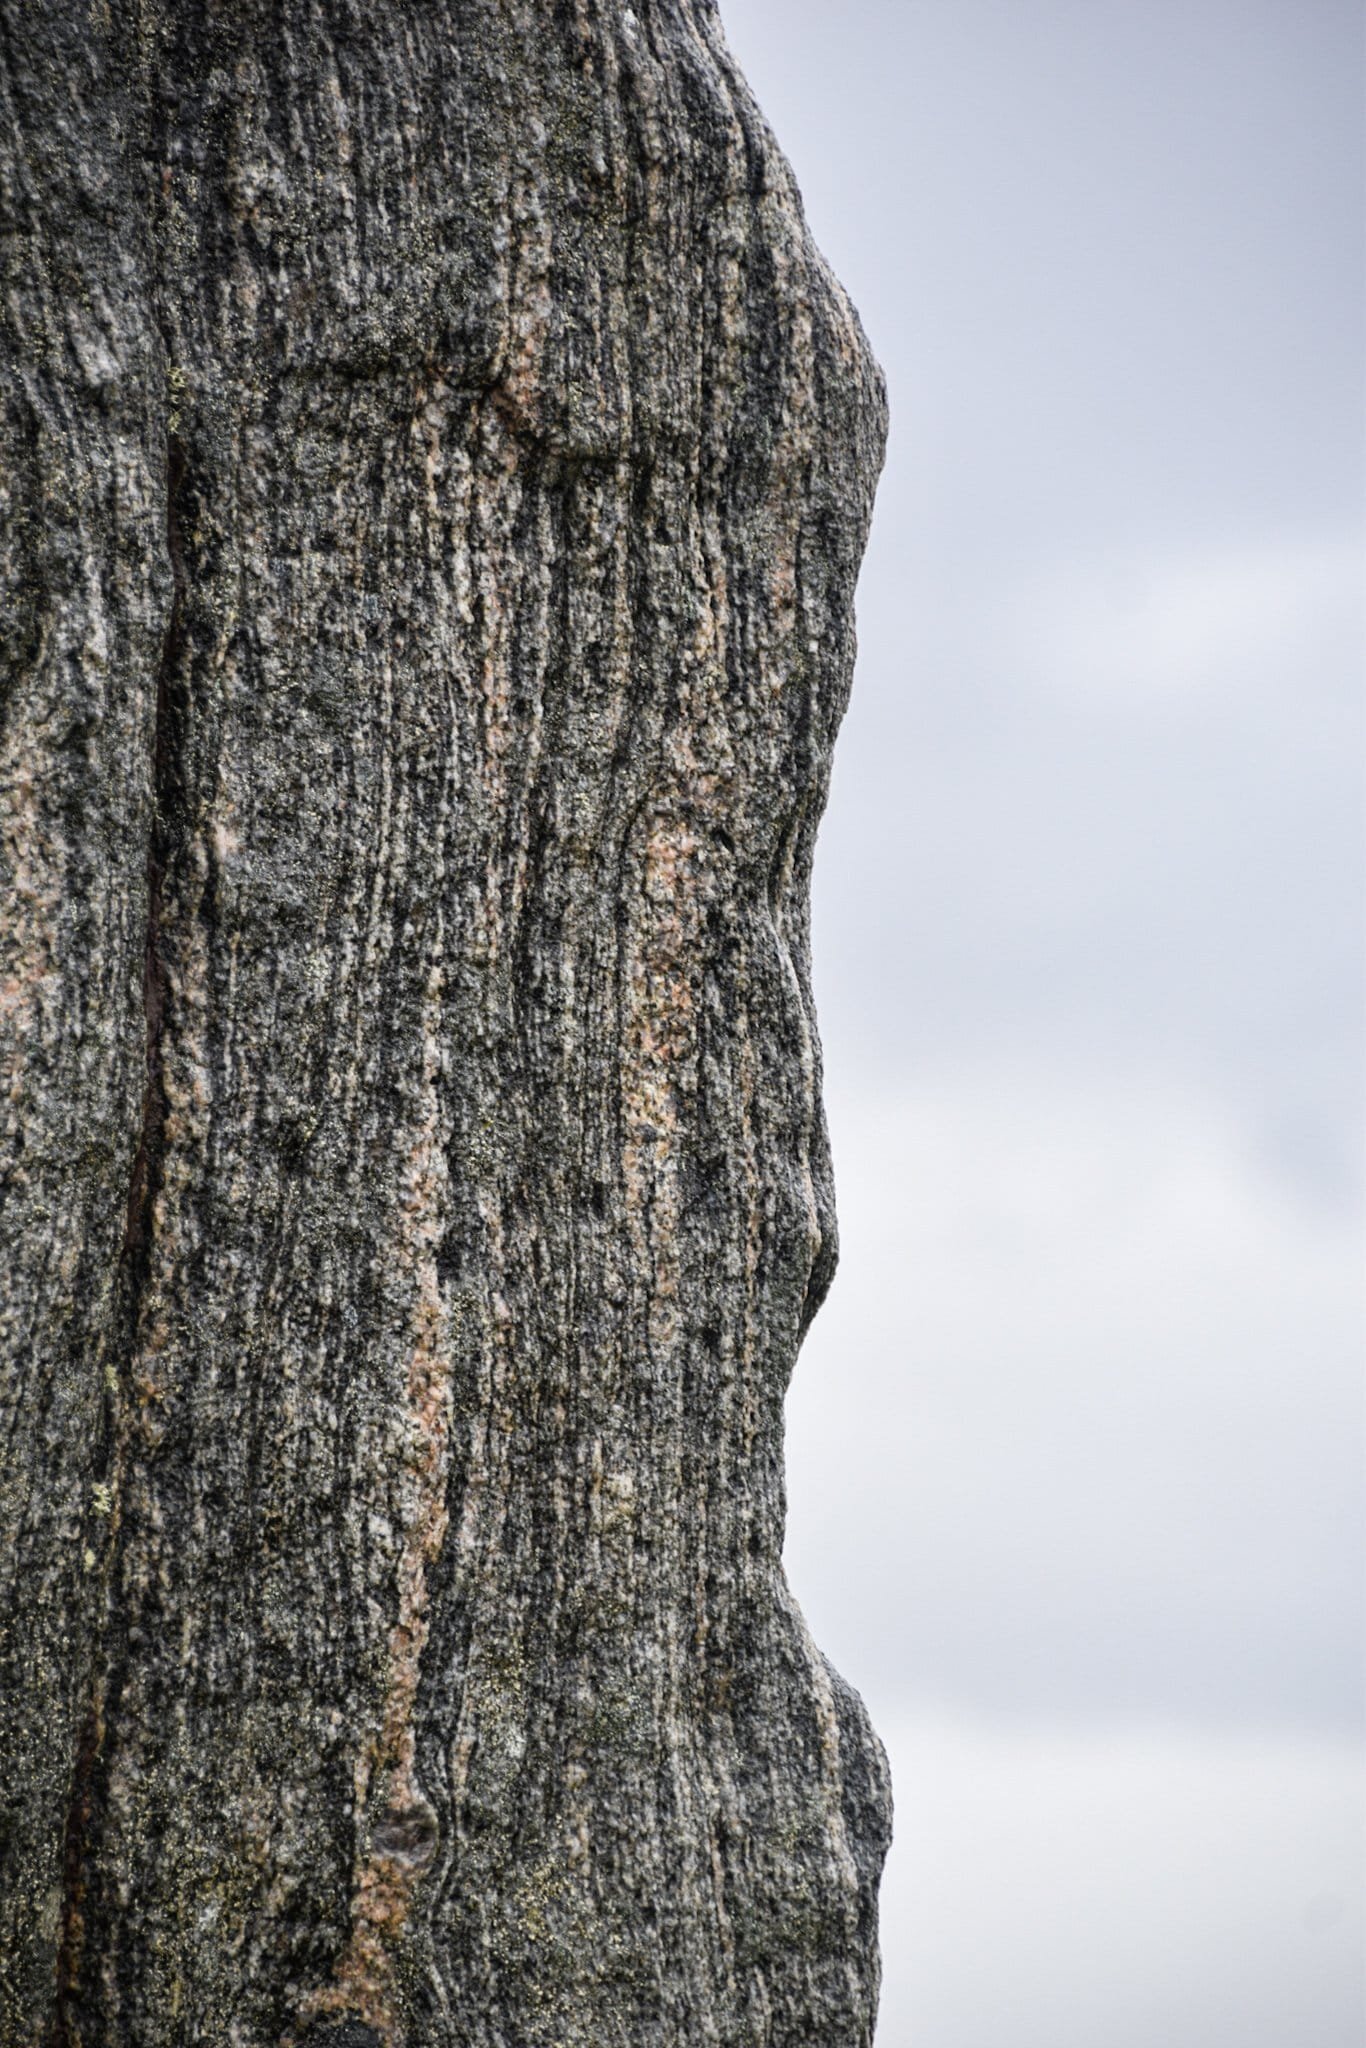 close-up textures of a standing stone